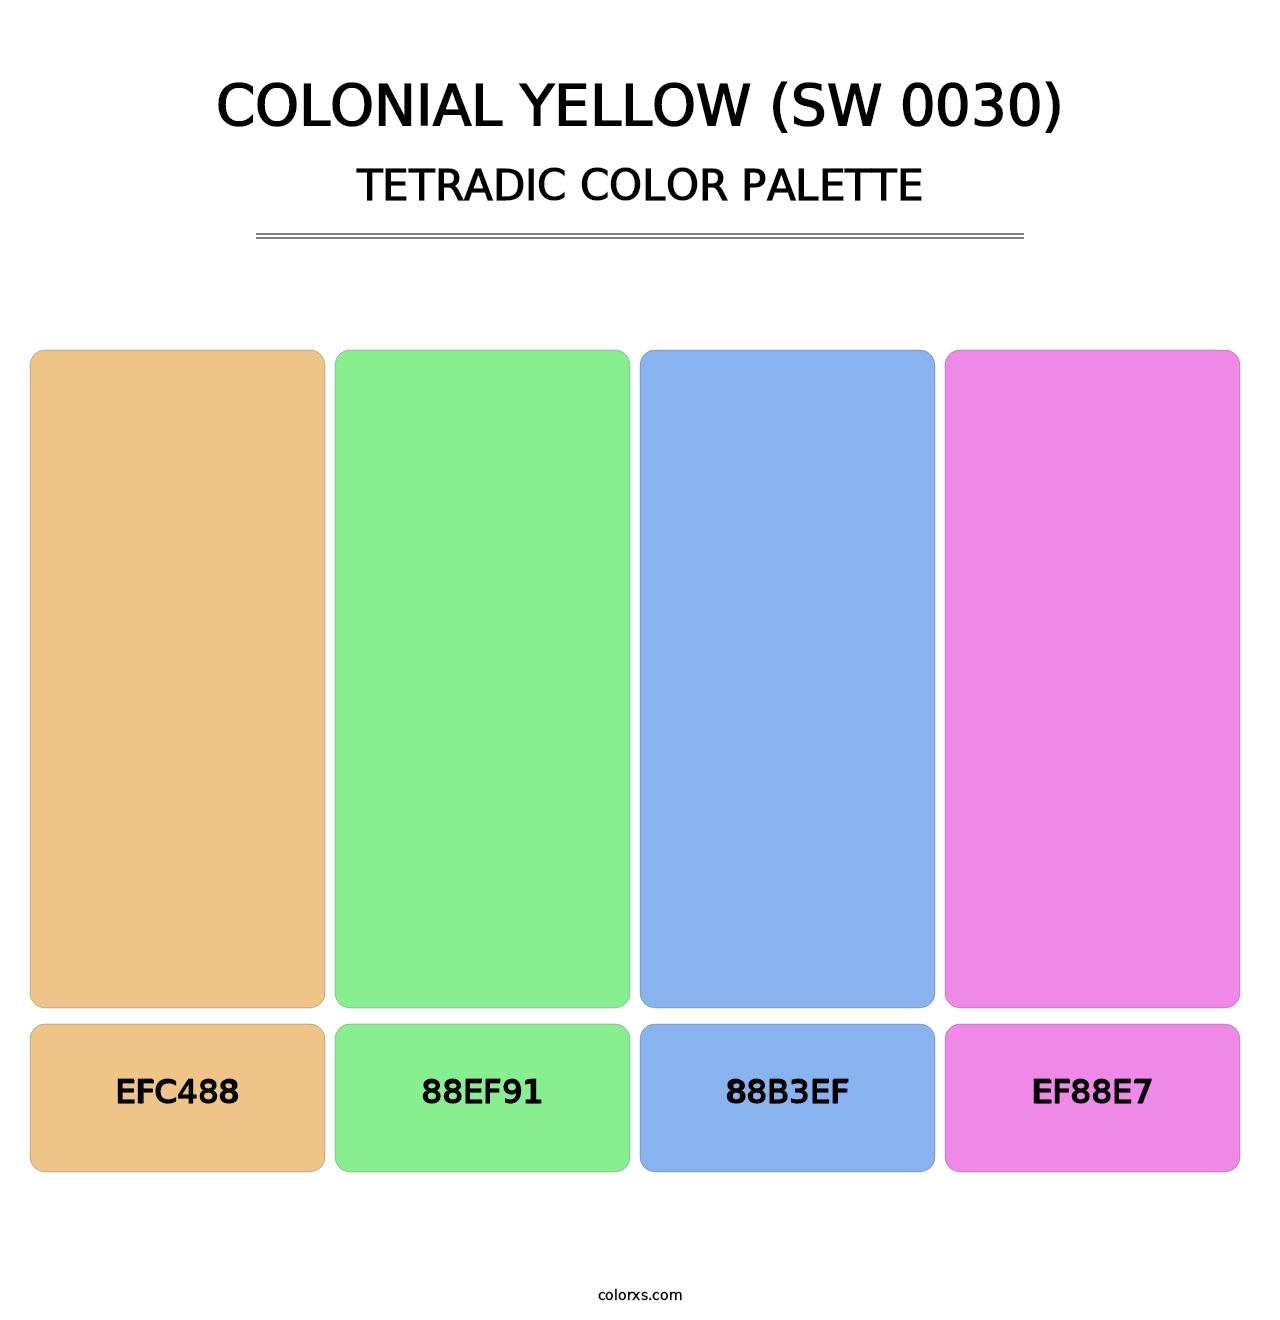 Colonial Yellow (SW 0030) - Tetradic Color Palette